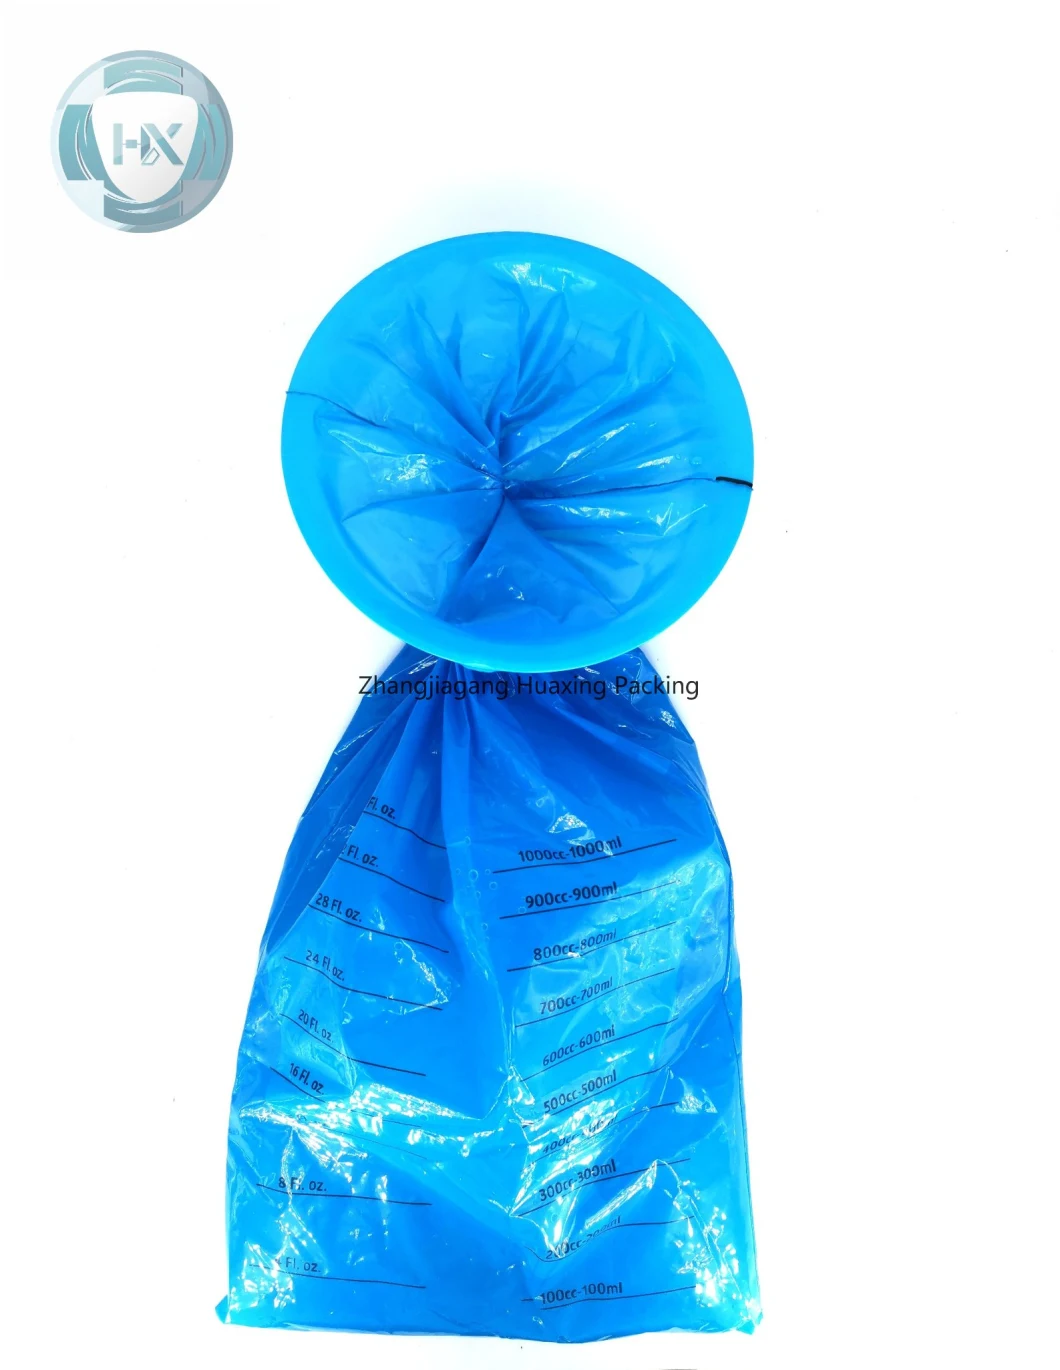 Factory Directly Supply Vomit Bags, Sickness Bags, Vomiting Bags, Emesis Bags, Air Sickness Bags, Sick Bags, Barf Bags, Car Sickness Bags, Motion Sickness Bags